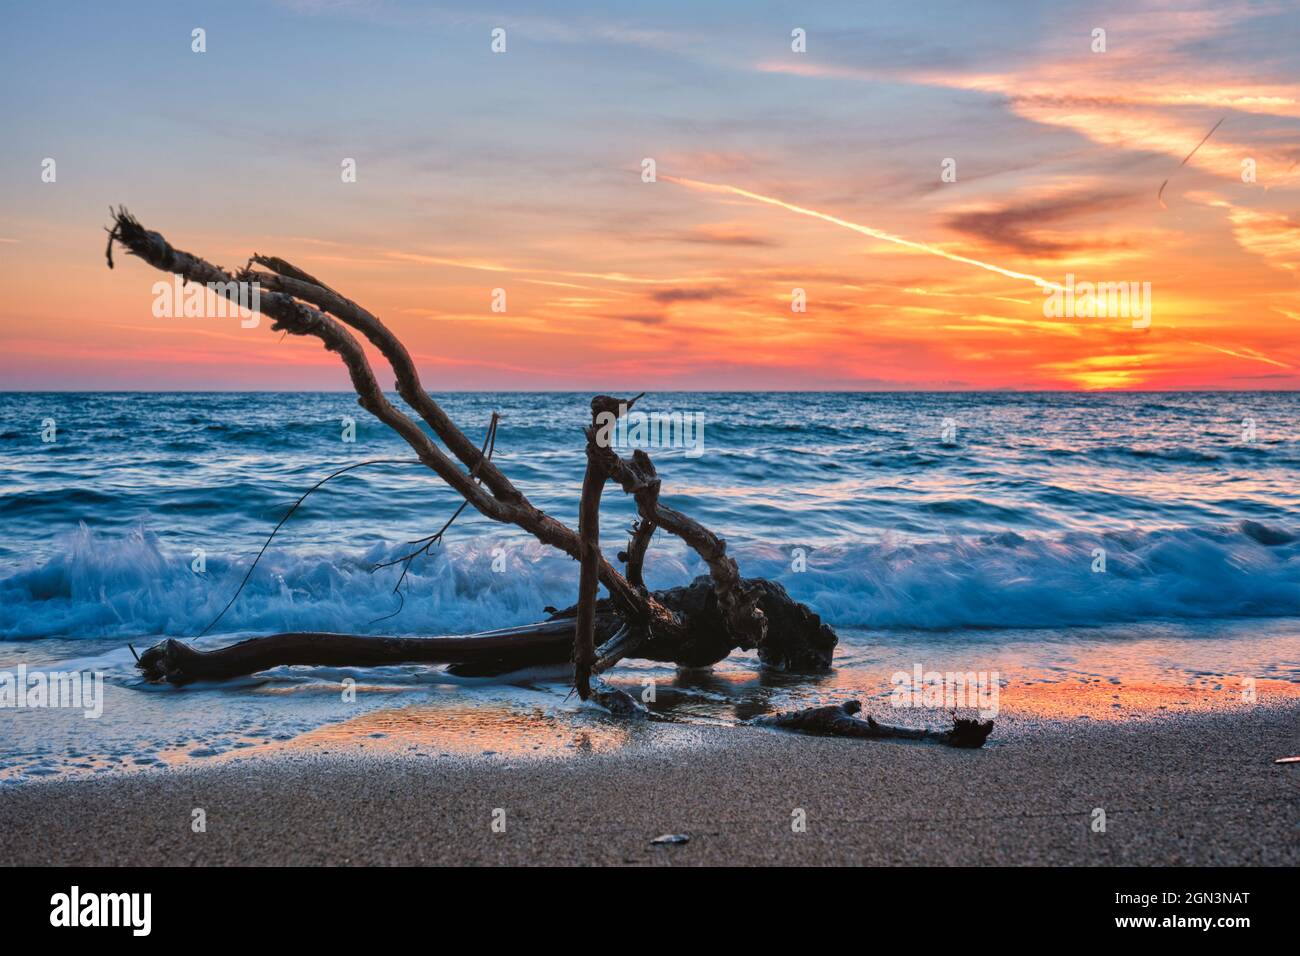 ld wood trunk snag in water at beach on beautiful sunset Stock Photo